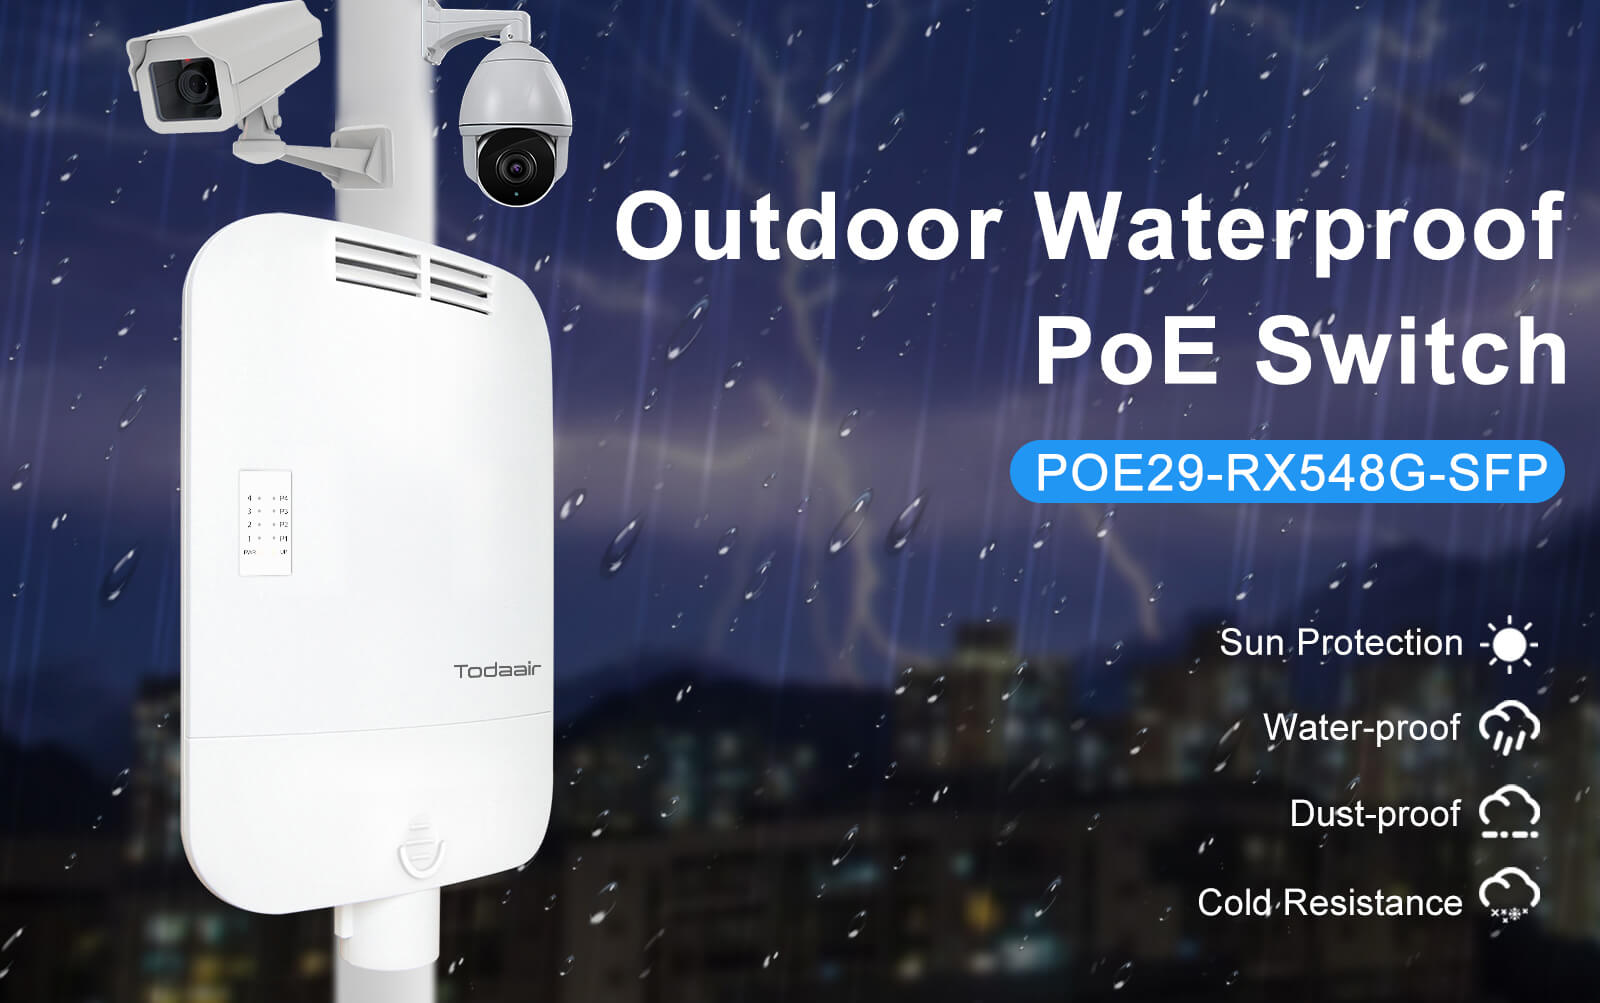 outdoor use，waterproof sun protection， dust-proof